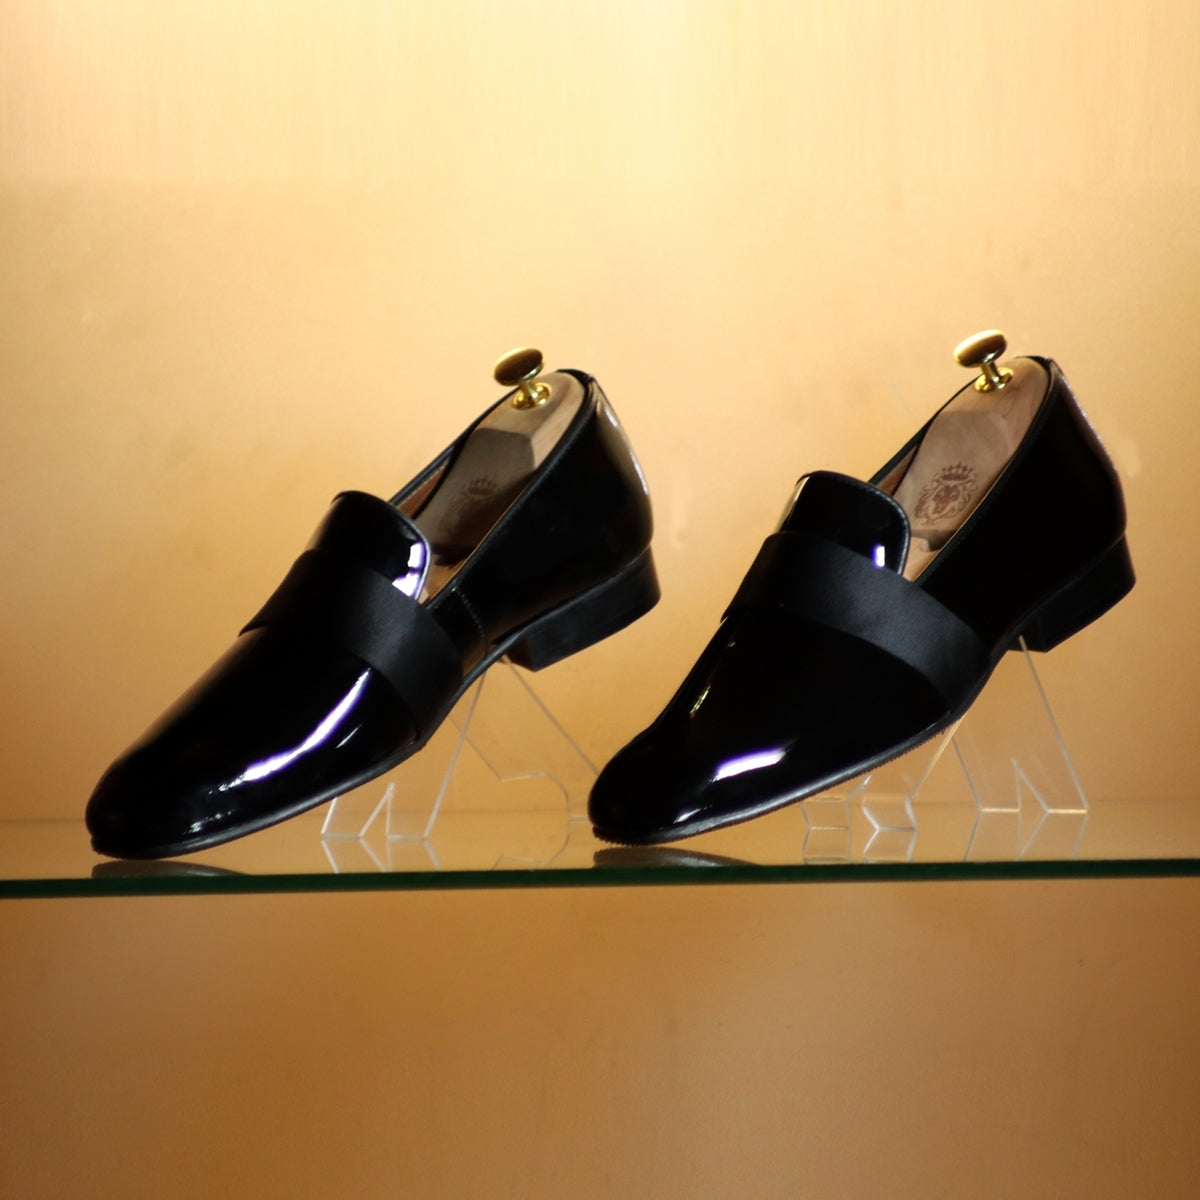 Black Patent Leather Slip-On Shoes with Mid-Strap Loafer Design 41/7